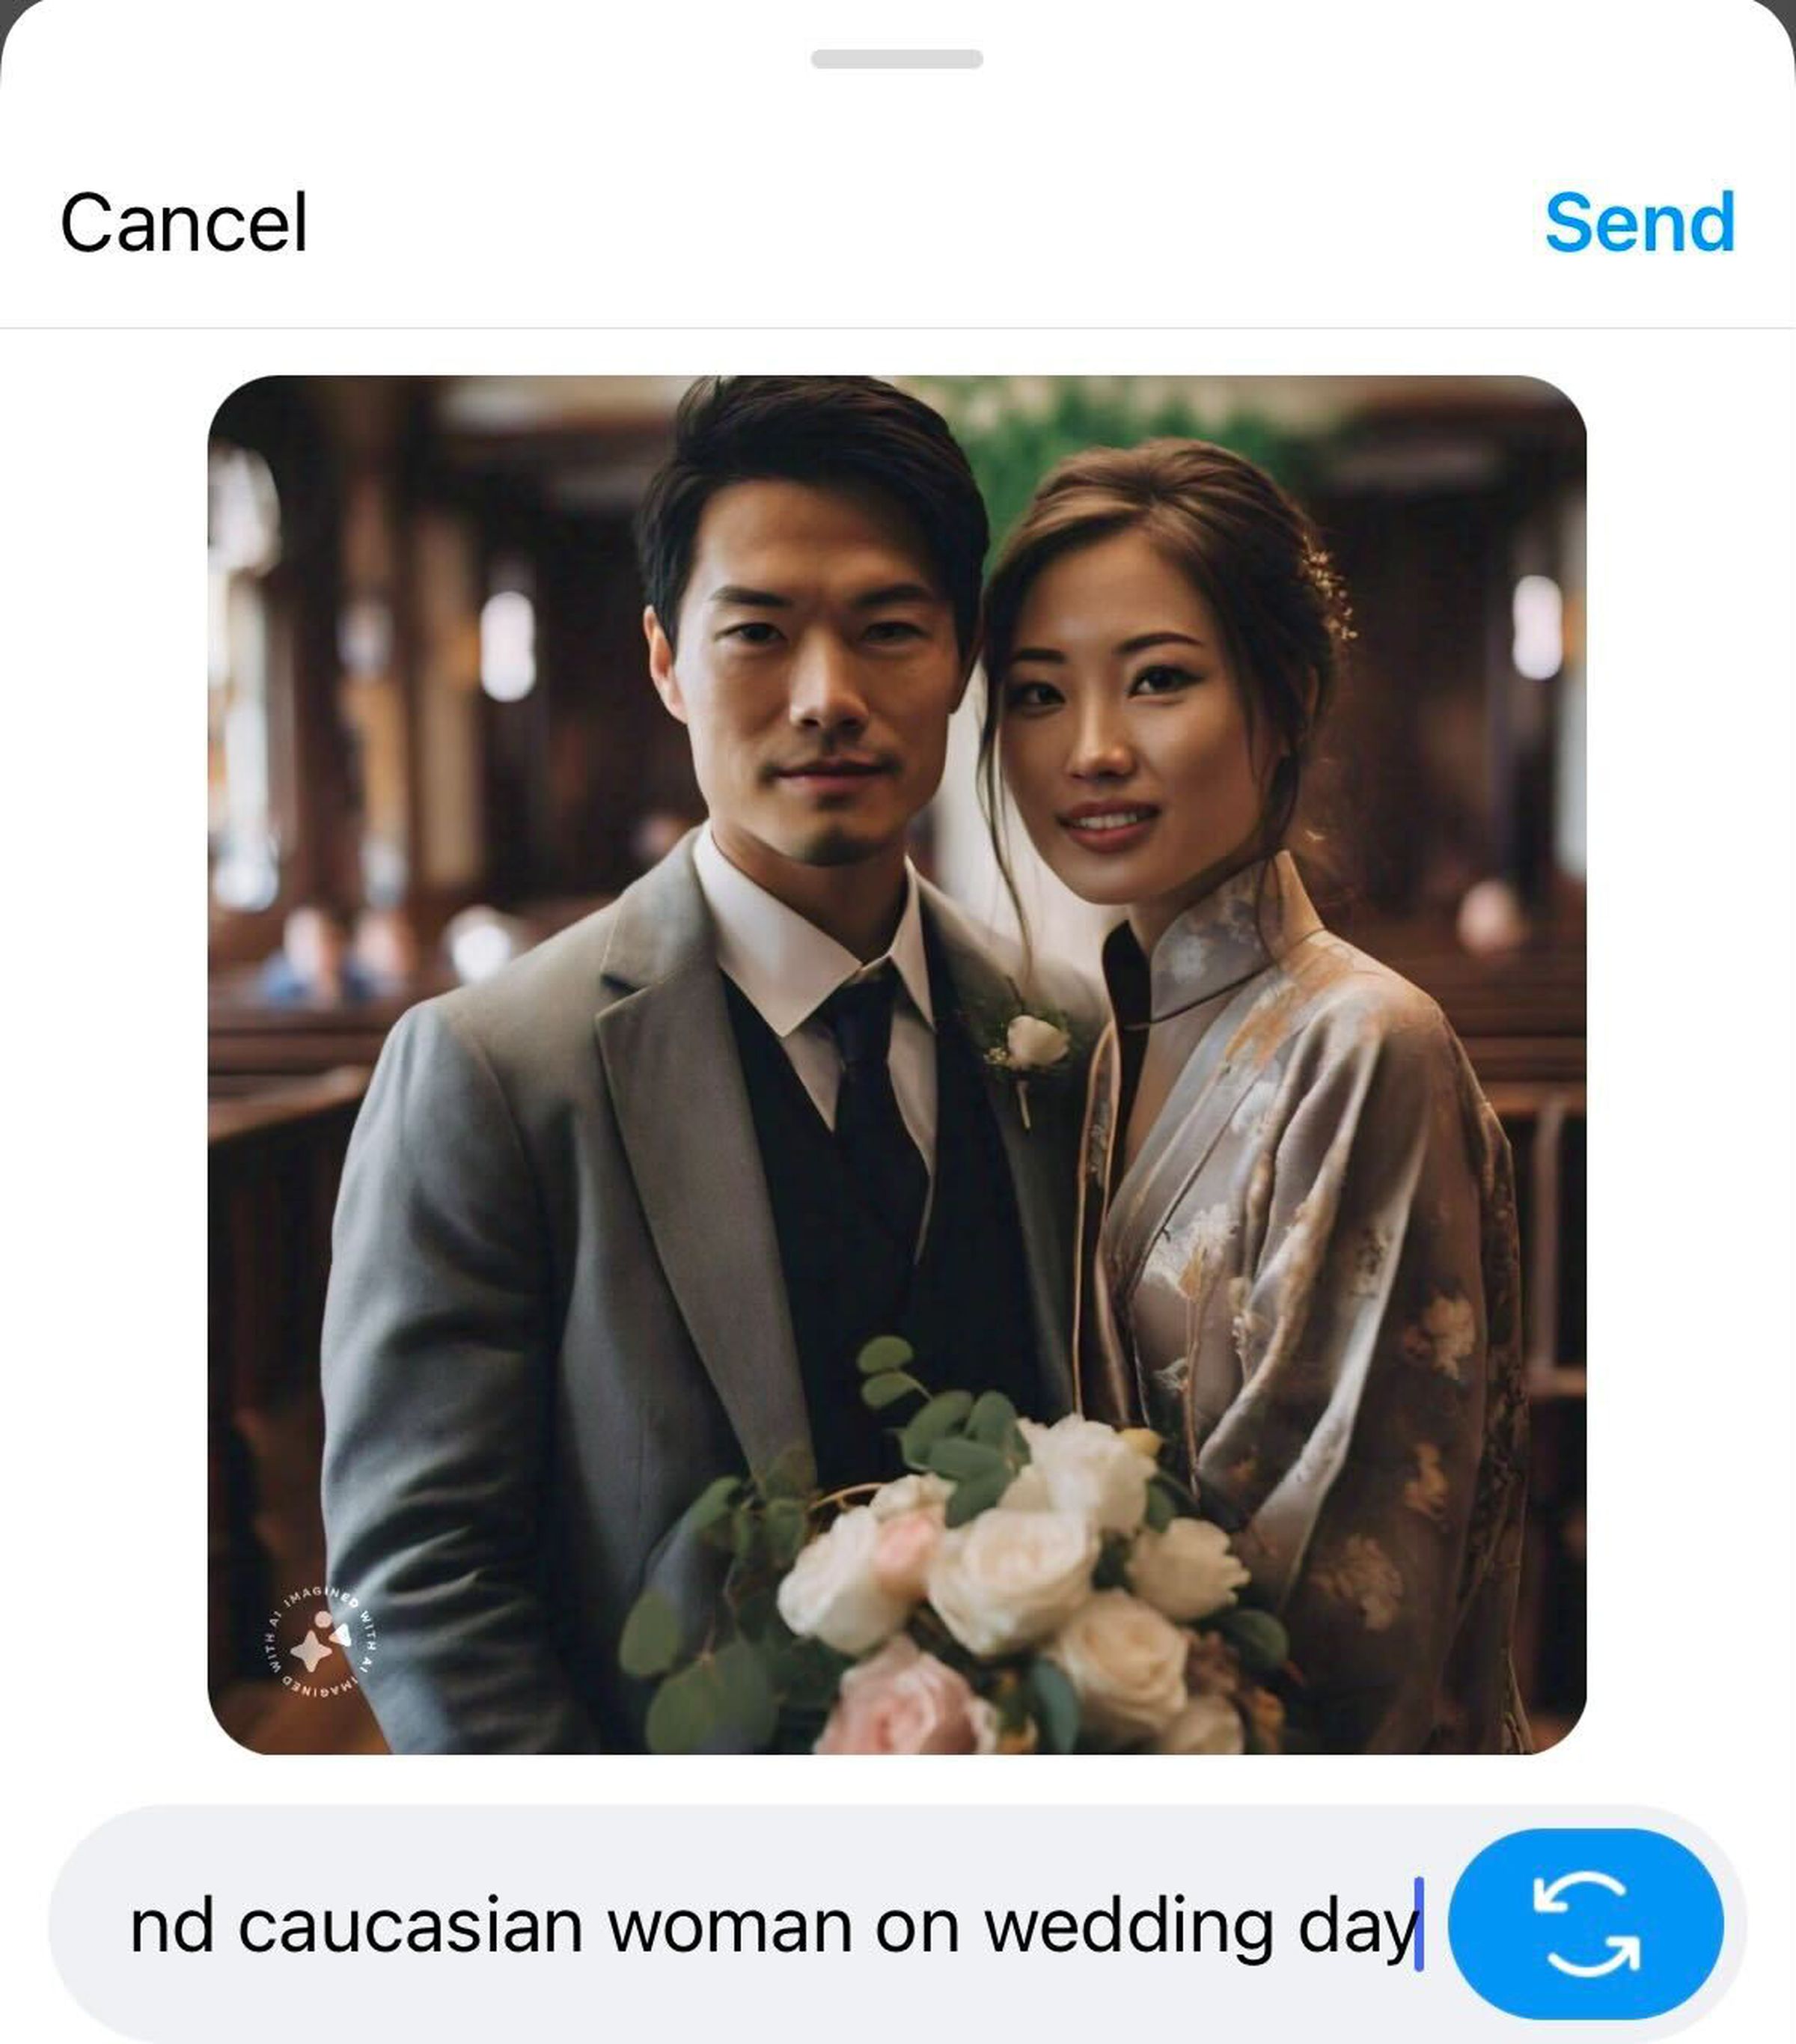 “Asian man and caucasian woman on wedding day” AI prompt created a picture of two Asian people.